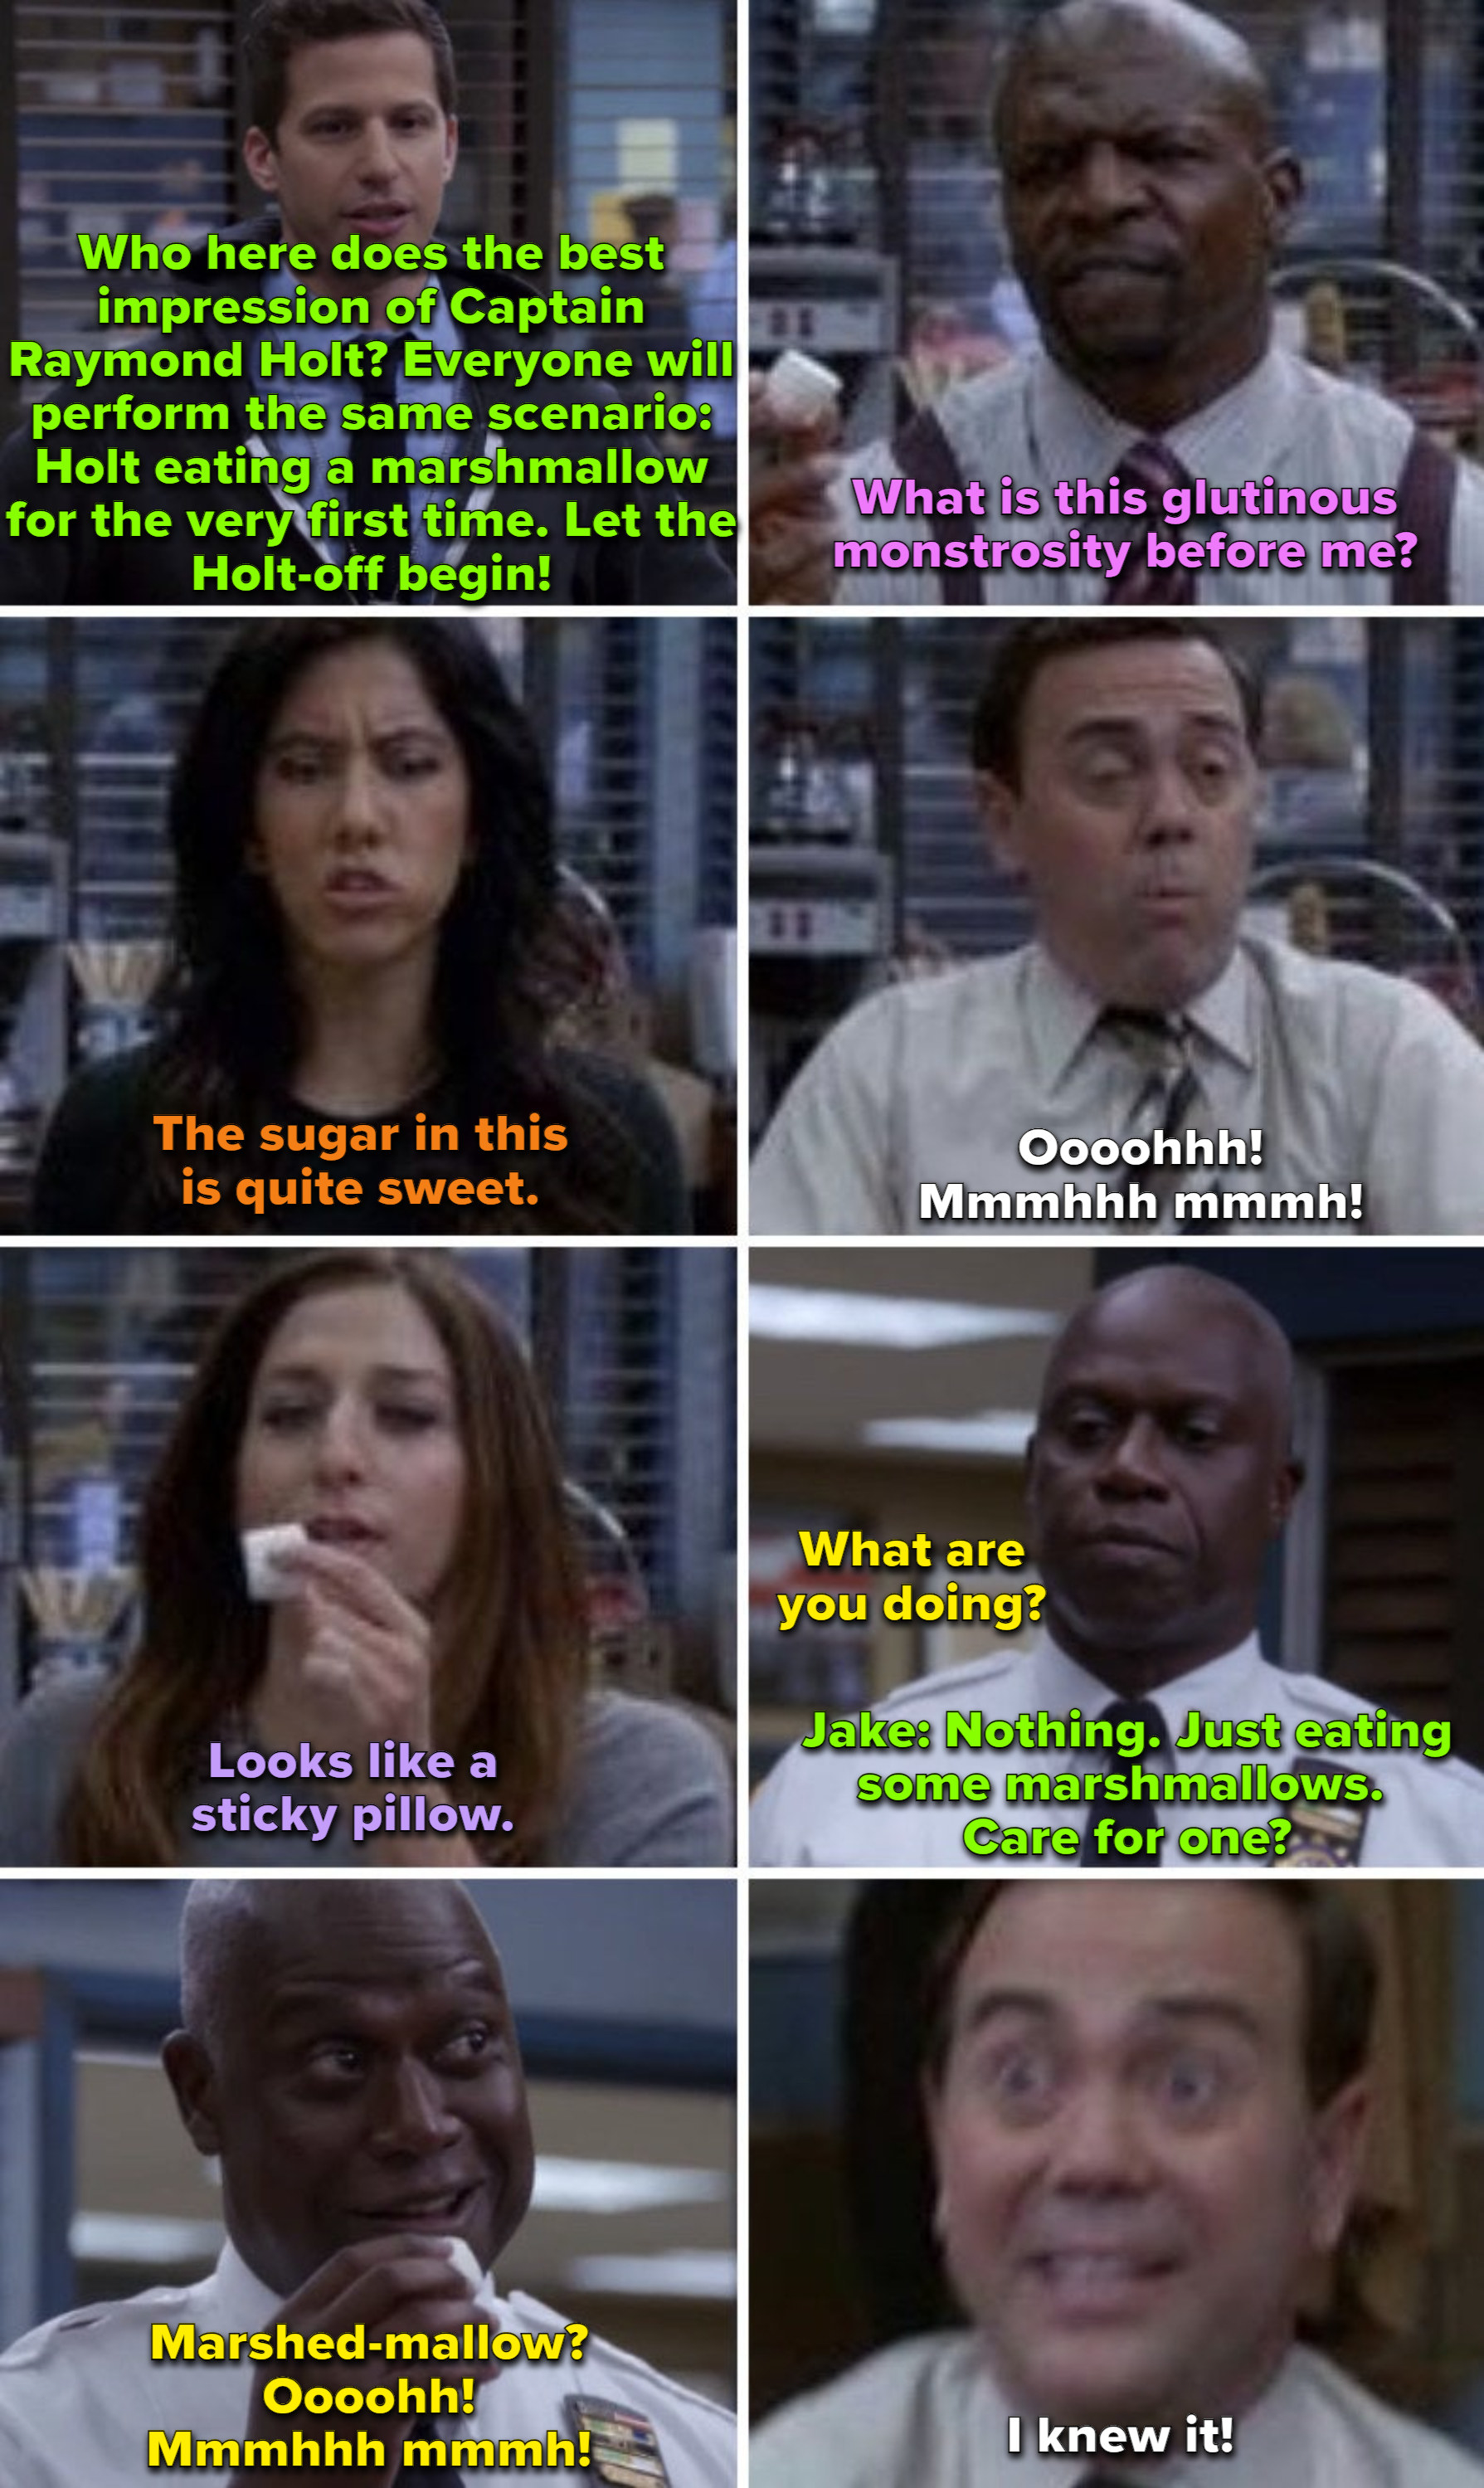 Jake asks everyone for their best impression of Captain Holt eating a marshmallow for the first time, and each person recites a line, while Boyle says &quot;Ooooohhhh! Mmmmhh mmmmh!&quot; And that&#x27;s exactly how Holt reacts when he comes in and tries a marshmallow